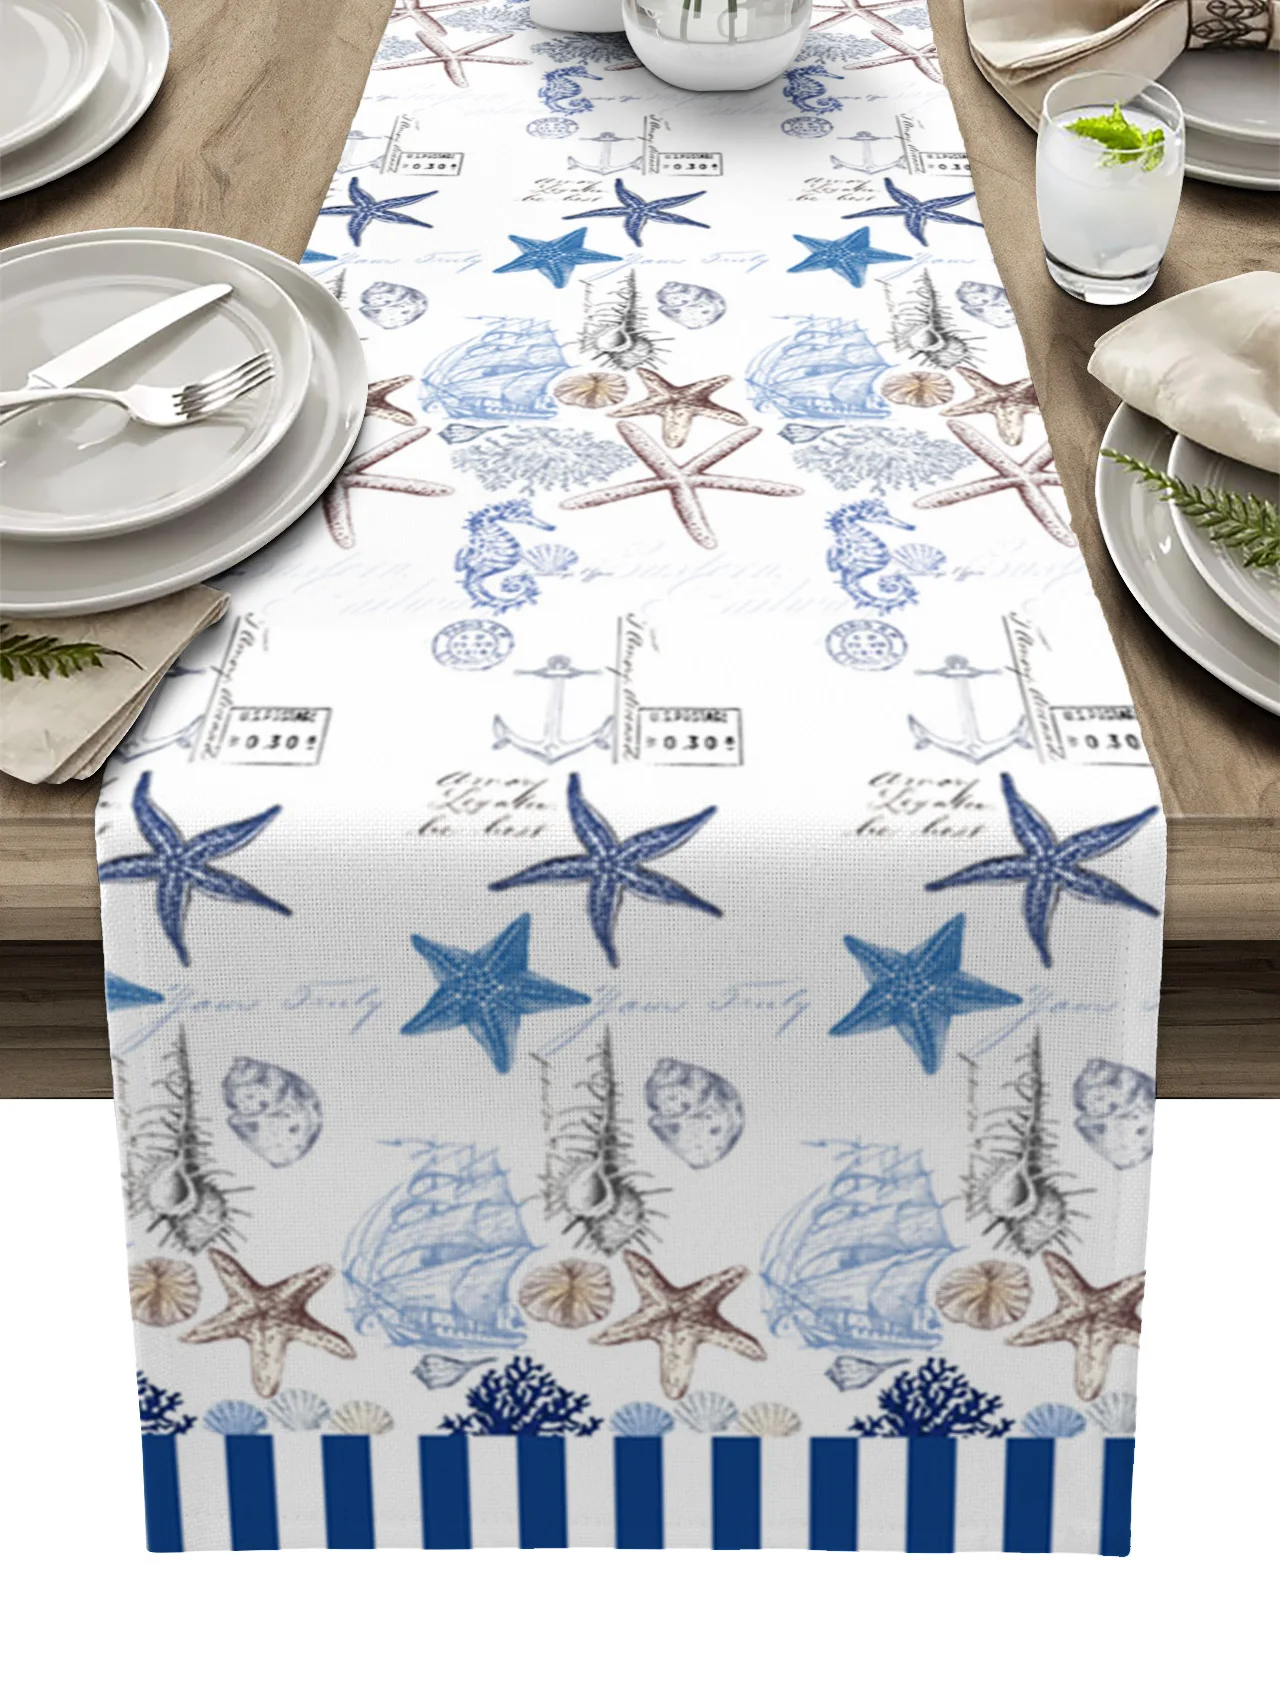 

Blue-brown Ocean Starfish Shell Coral Vessel Stripes Table Runner Decoration Home Decor Dinner Table Decoration Table Decor